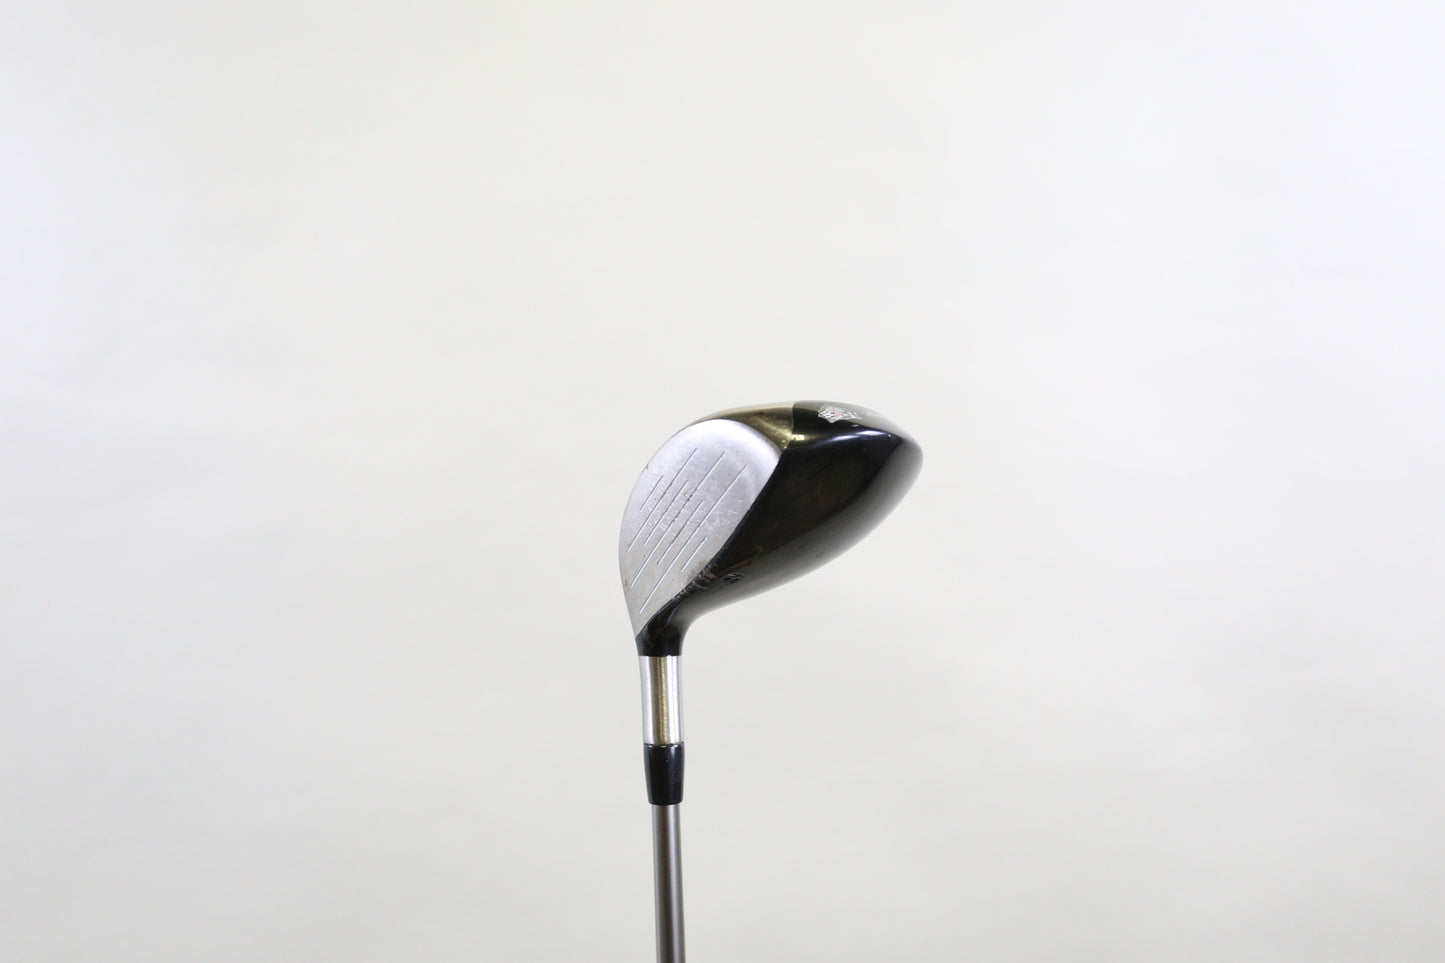 Used TaylorMade r7 Steel 3-Wood - Right-Handed - 15 Degrees - Stiff Flex